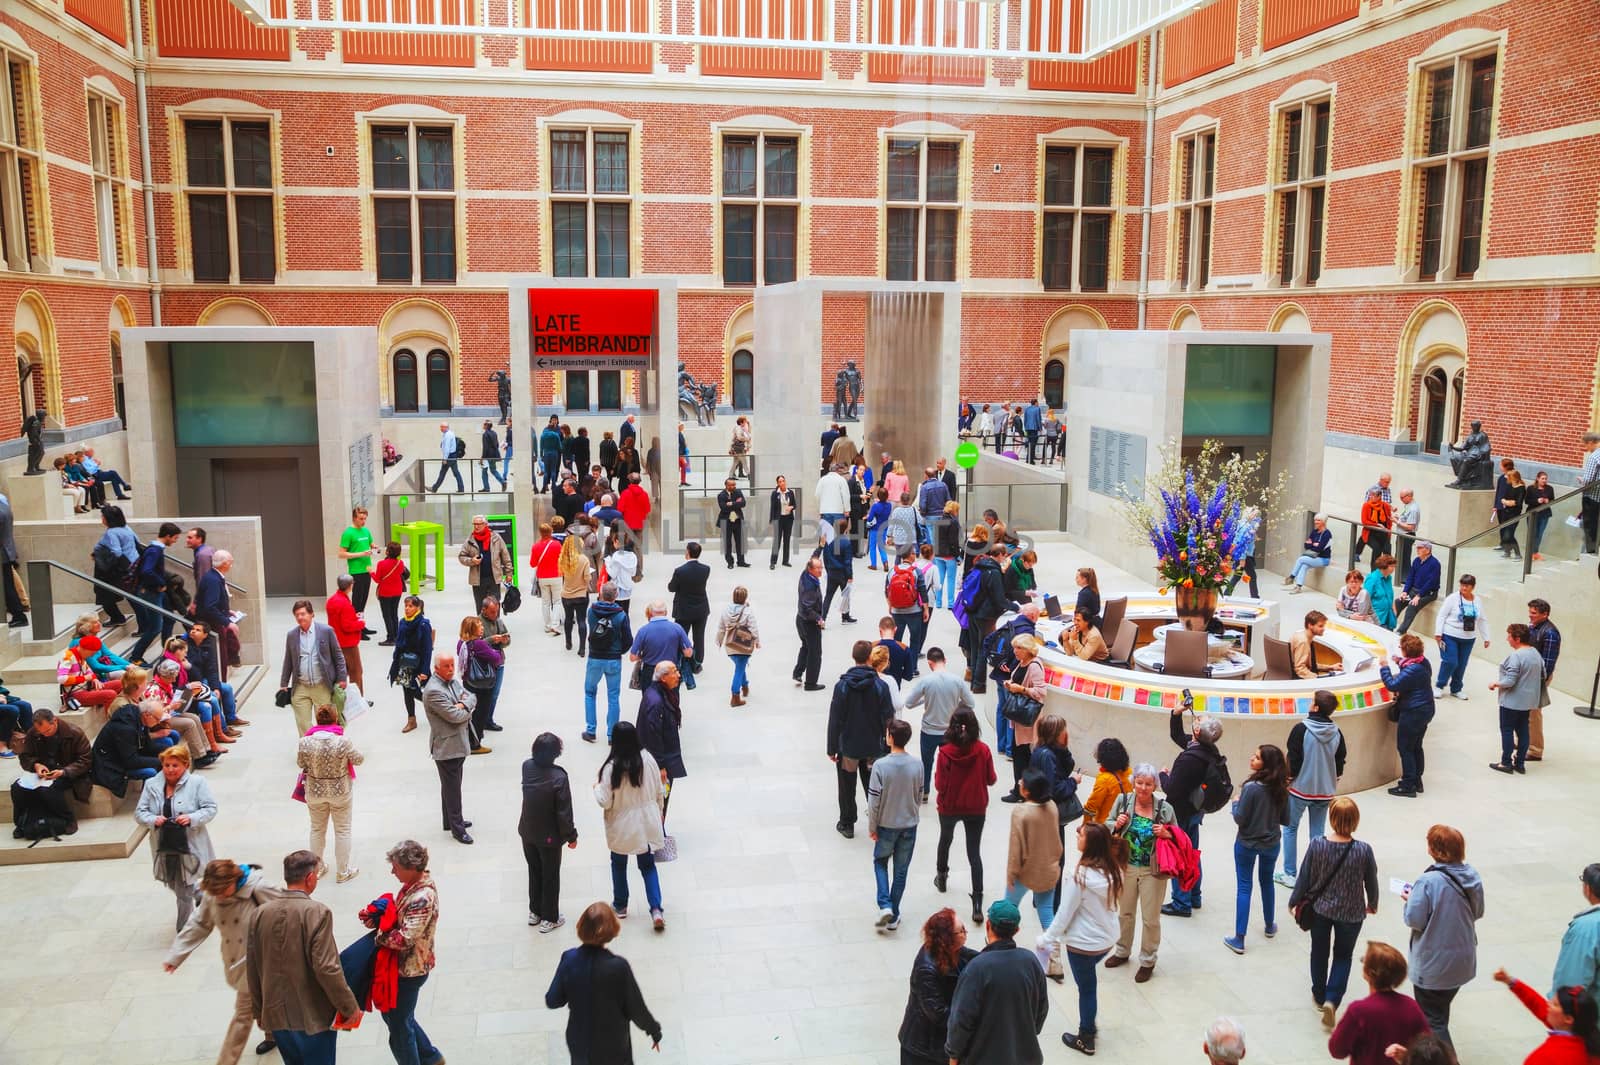 AMSTERDAM - APRIL 16: Entrance to Rijksmuseum crowded with people on April 16, 2015 in Amsterdam. It's a Netherlands national museum dedicated to arts and history.